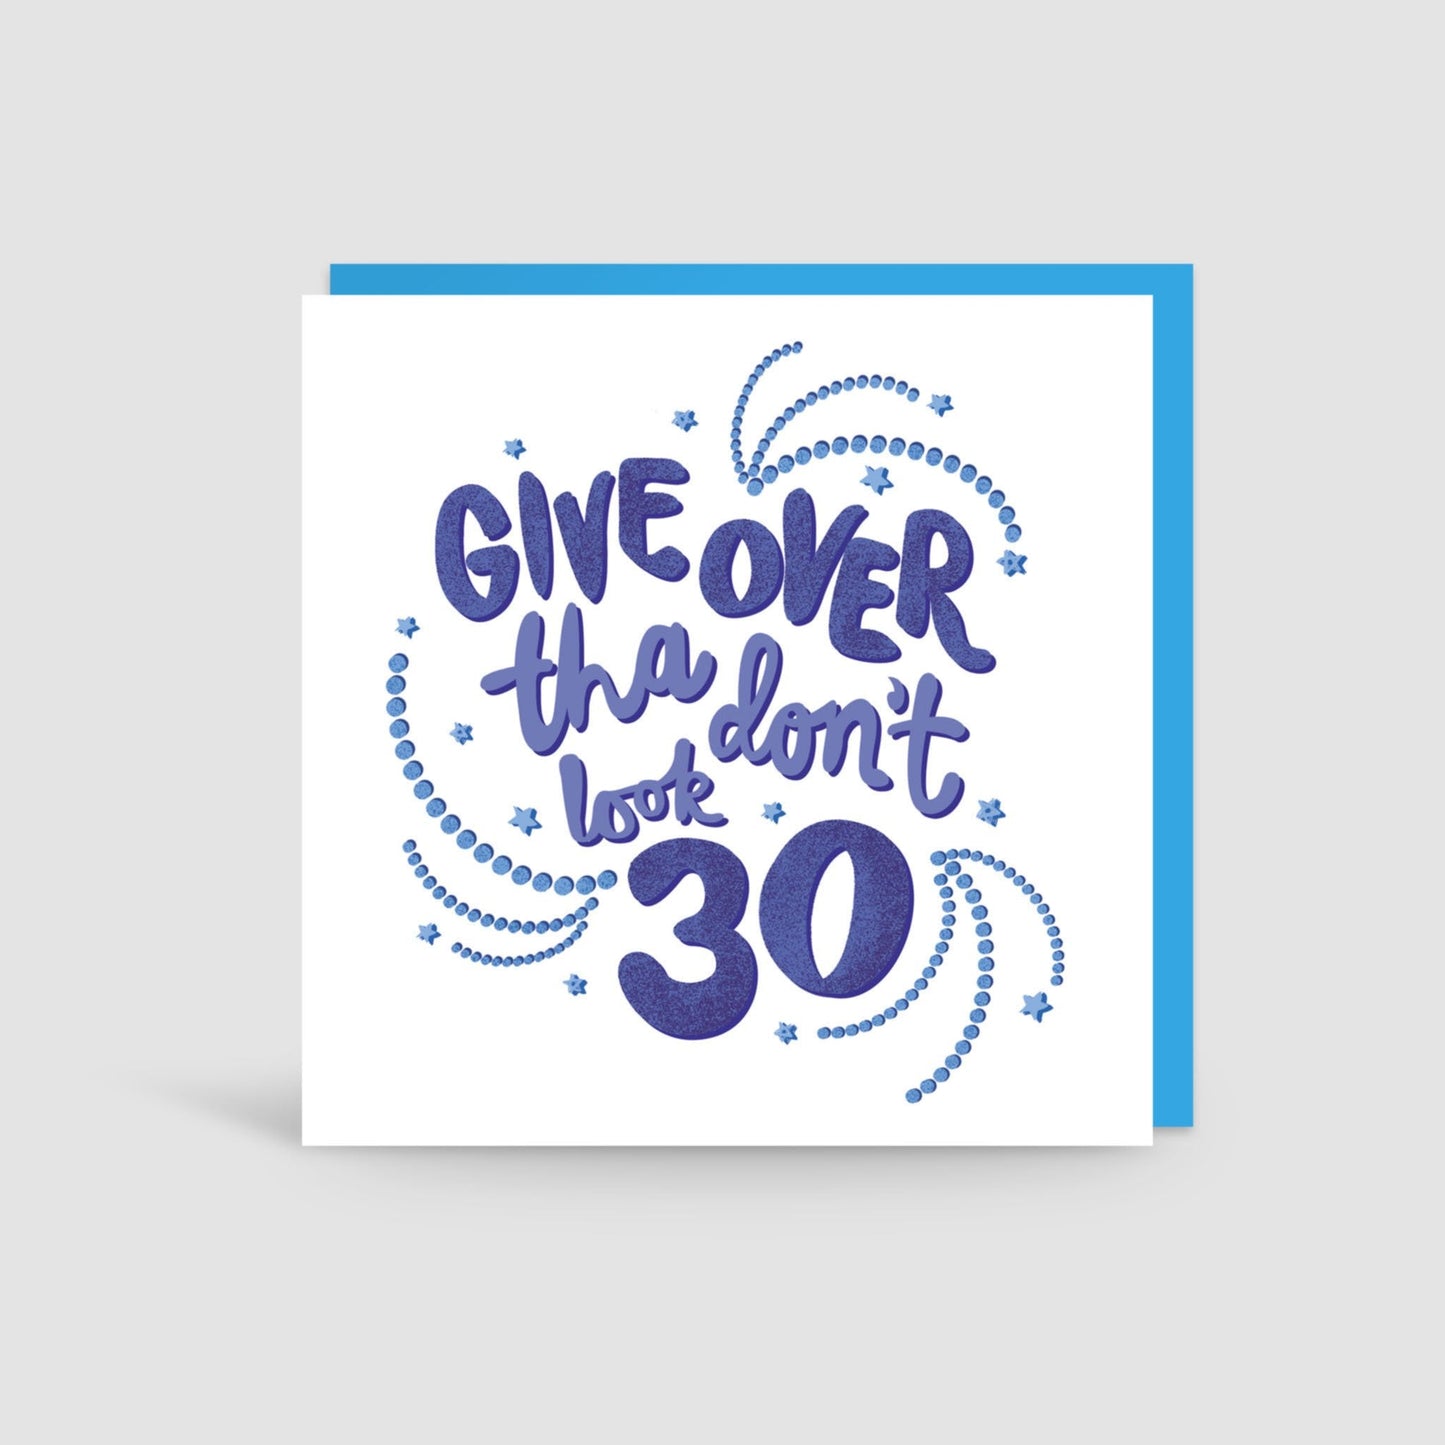 Give Over Tha's Never 30 Card - The Great Yorkshire Shop